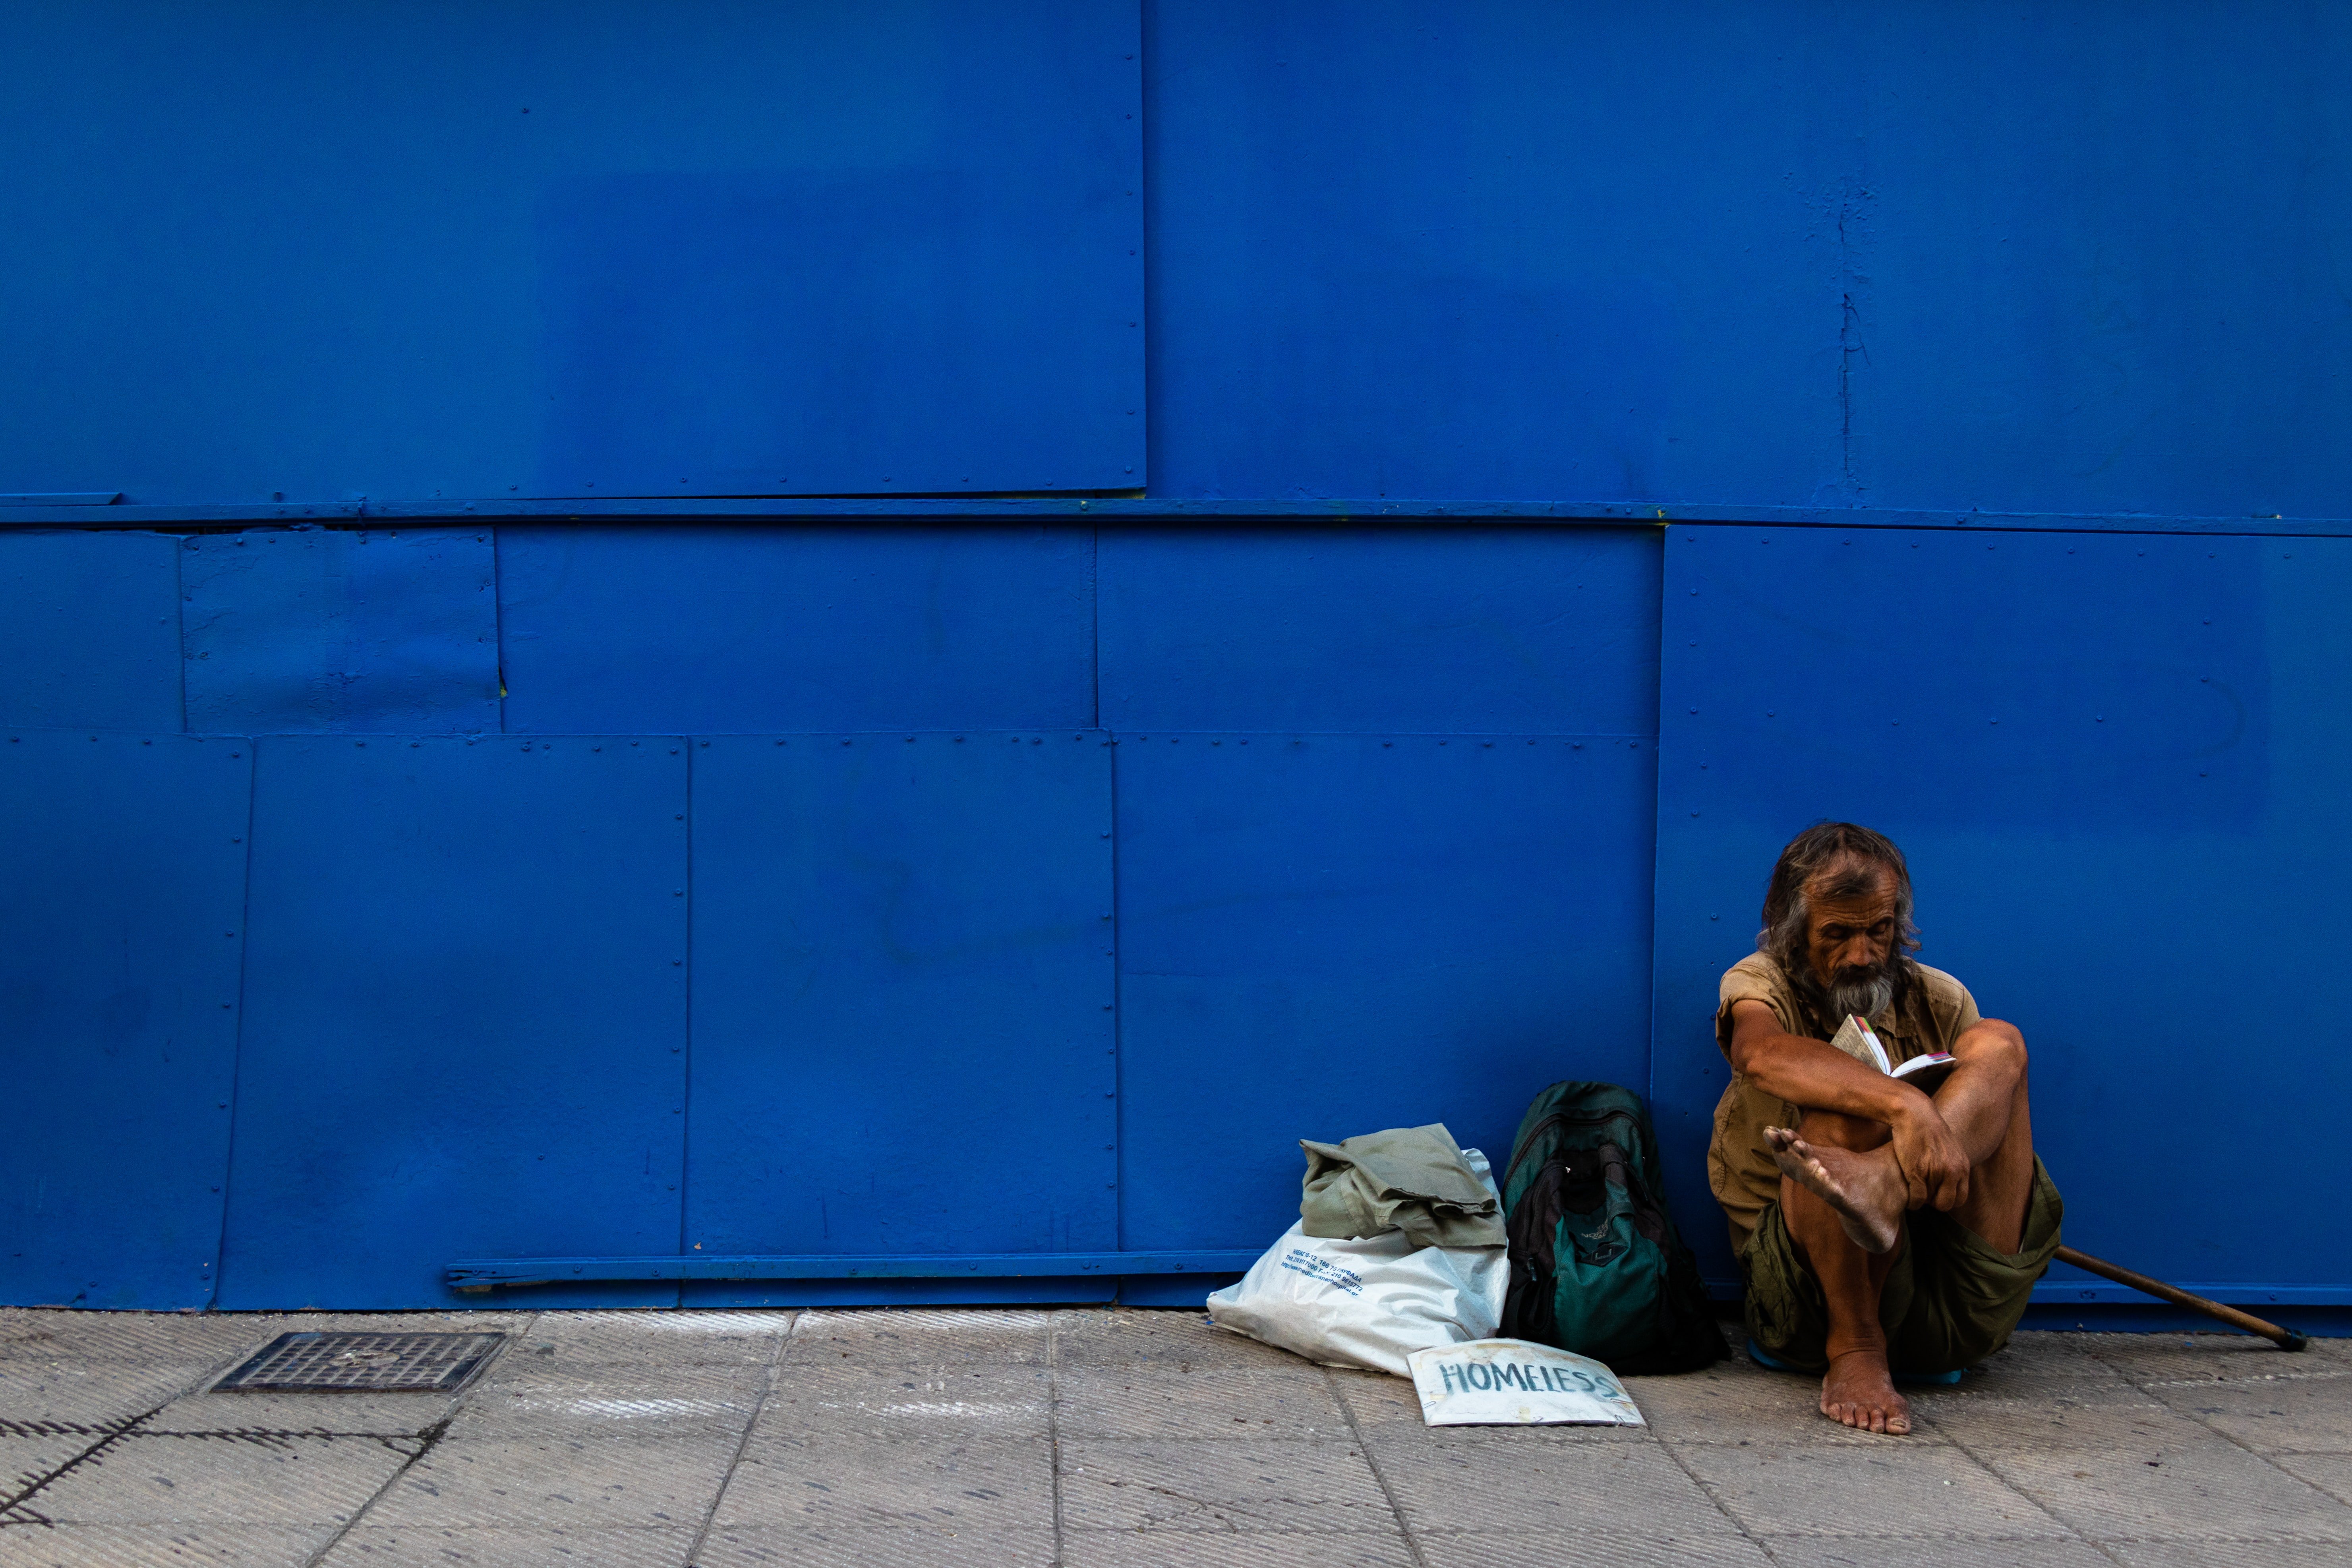 Man sitting against a blue wall sitting next to a couple of bags | Source: Unsplash / Jonathan Kho